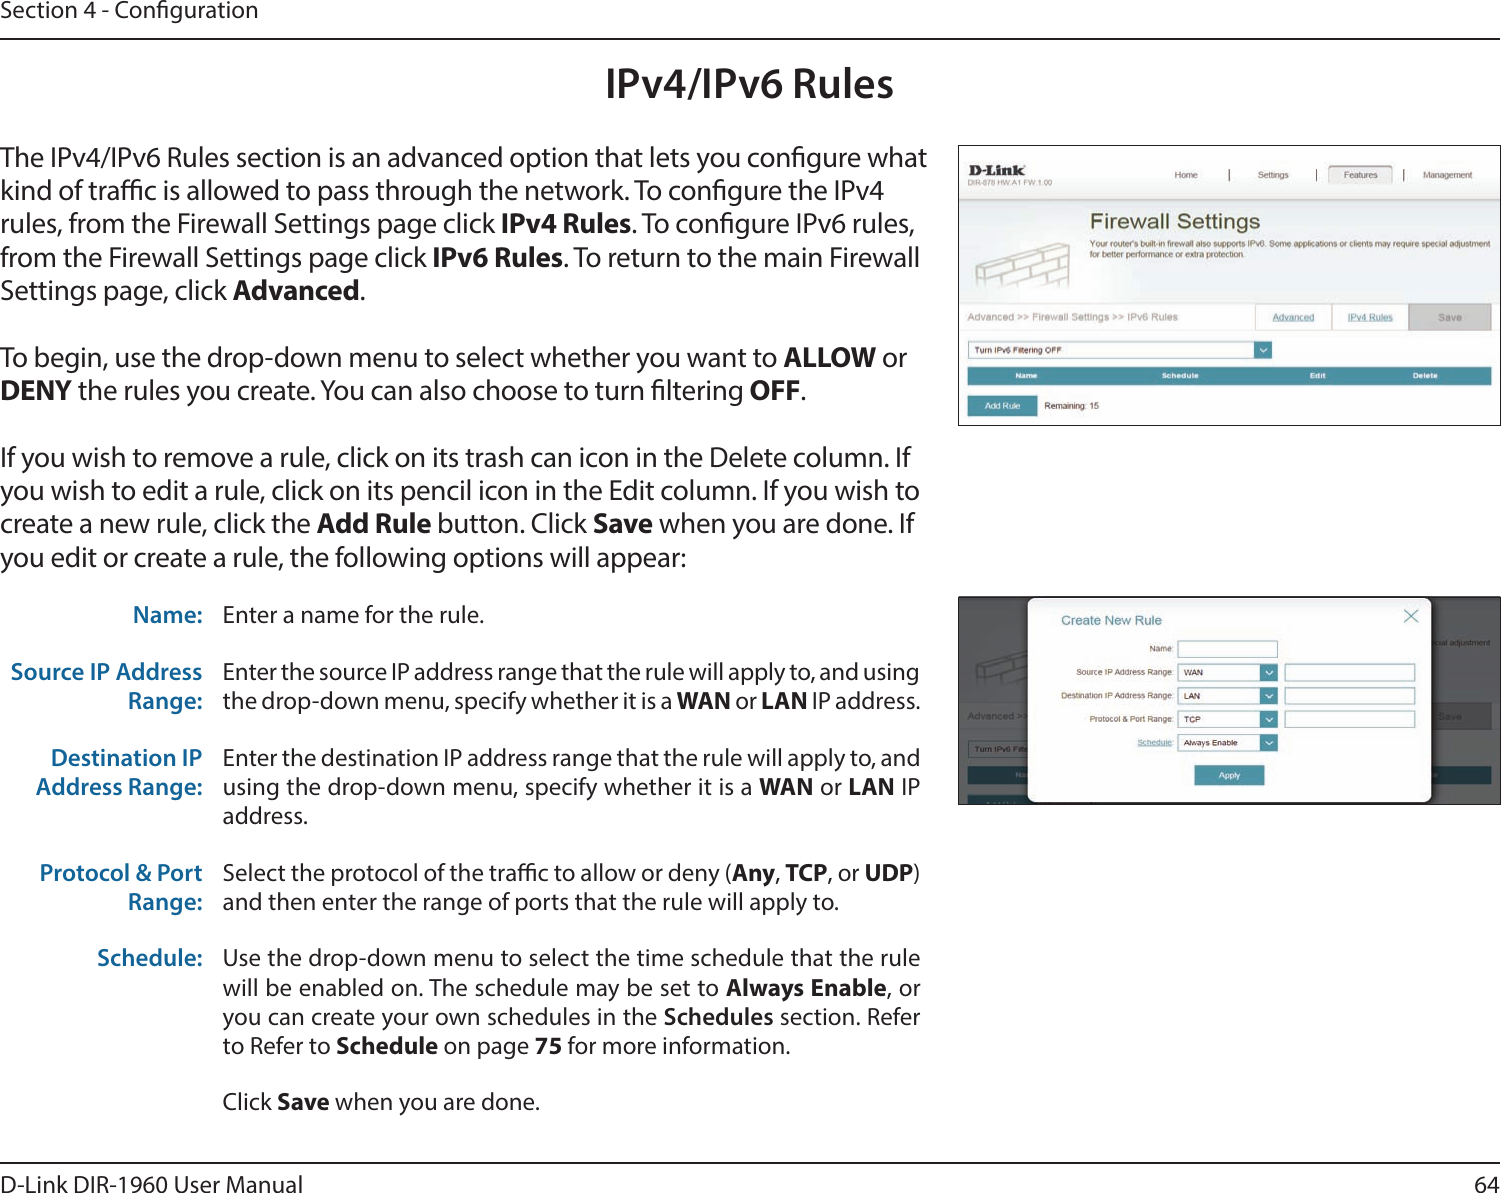 64D-Link DIR-1960 User ManualSection 4 - CongurationIPv4/IPv6 RulesThe IPv4/IPv6 Rules section is an advanced option that lets you congure what kind of trac is allowed to pass through the network. To congure the IPv4 rules, from the Firewall Settings page click IPv4 Rules. To congure IPv6 rules, from the Firewall Settings page click IPv6 Rules. To return to the main Firewall Settings page, click Advanced.To begin, use the drop-down menu to select whether you want to ALLOW or DENY the rules you create. You can also choose to turn ltering OFF.If you wish to remove a rule, click on its trash can icon in the Delete column. If you wish to edit a rule, click on its pencil icon in the Edit column. If you wish to create a new rule, click the Add Rule button. Click Save when you are done. If you edit or create a rule, the following options will appear:Name: Enter a name for the rule.Source IP Address Range:Enter the source IP address range that the rule will apply to, and using the drop-down menu, specify whether it is a WAN or LAN IP address.Destination IP Address Range:Enter the destination IP address range that the rule will apply to, and using the drop-down menu, specify whether it is a WAN or LAN IP address.Protocol &amp; Port Range:Select the protocol of the trac to allow or deny (Any, TCP, or UDP) and then enter the range of ports that the rule will apply to.Schedule: Use the drop-down menu to select the time schedule that the rule will be enabled on. The schedule may be set to Always Enable, or you can create your own schedules in the Schedules section. Refer to Refer to Schedule on page 75 for more information.Click Save when you are done.